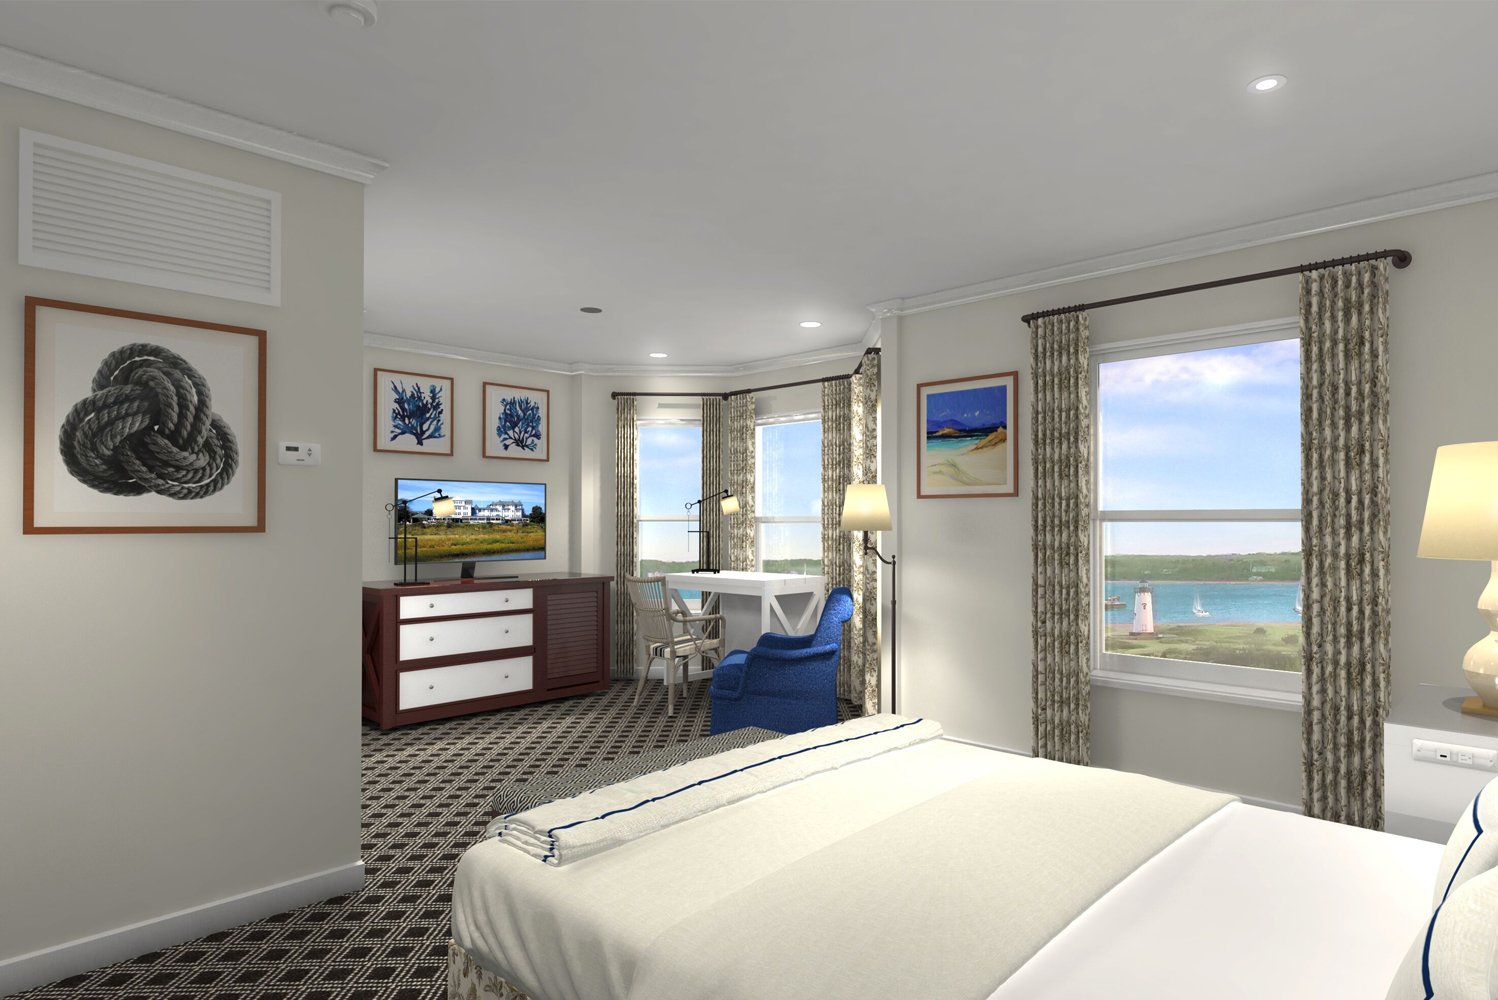 Harbor View Hotel a property that opened in Marthas Vineyard 128 years ago is slated to reopen on May 1 following a top-